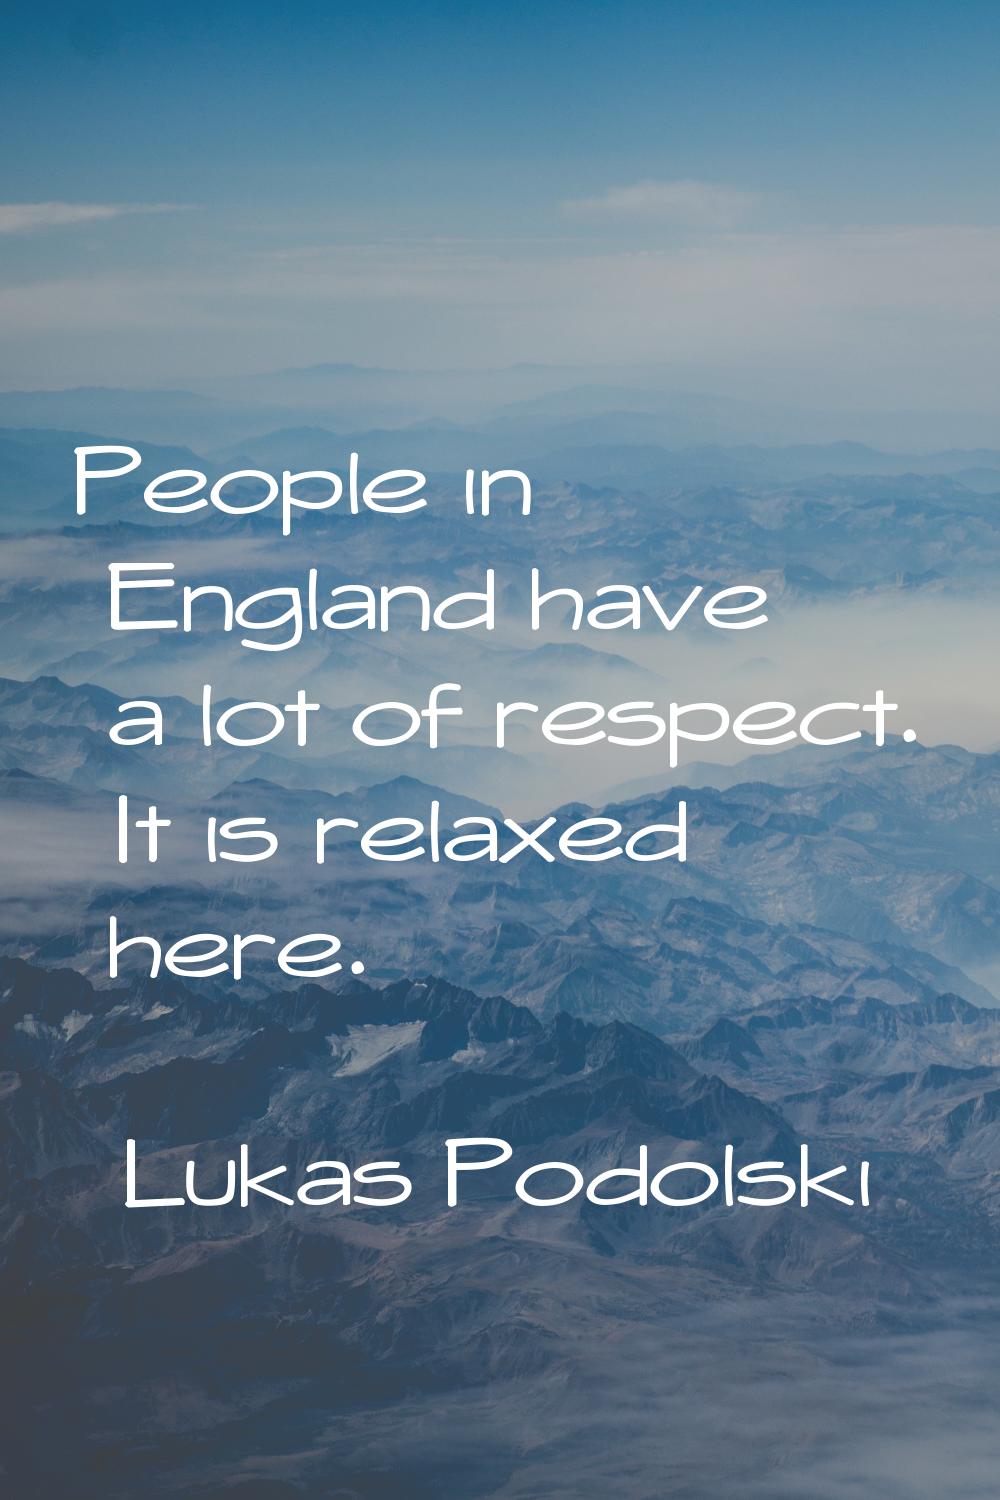 People in England have a lot of respect. It is relaxed here.